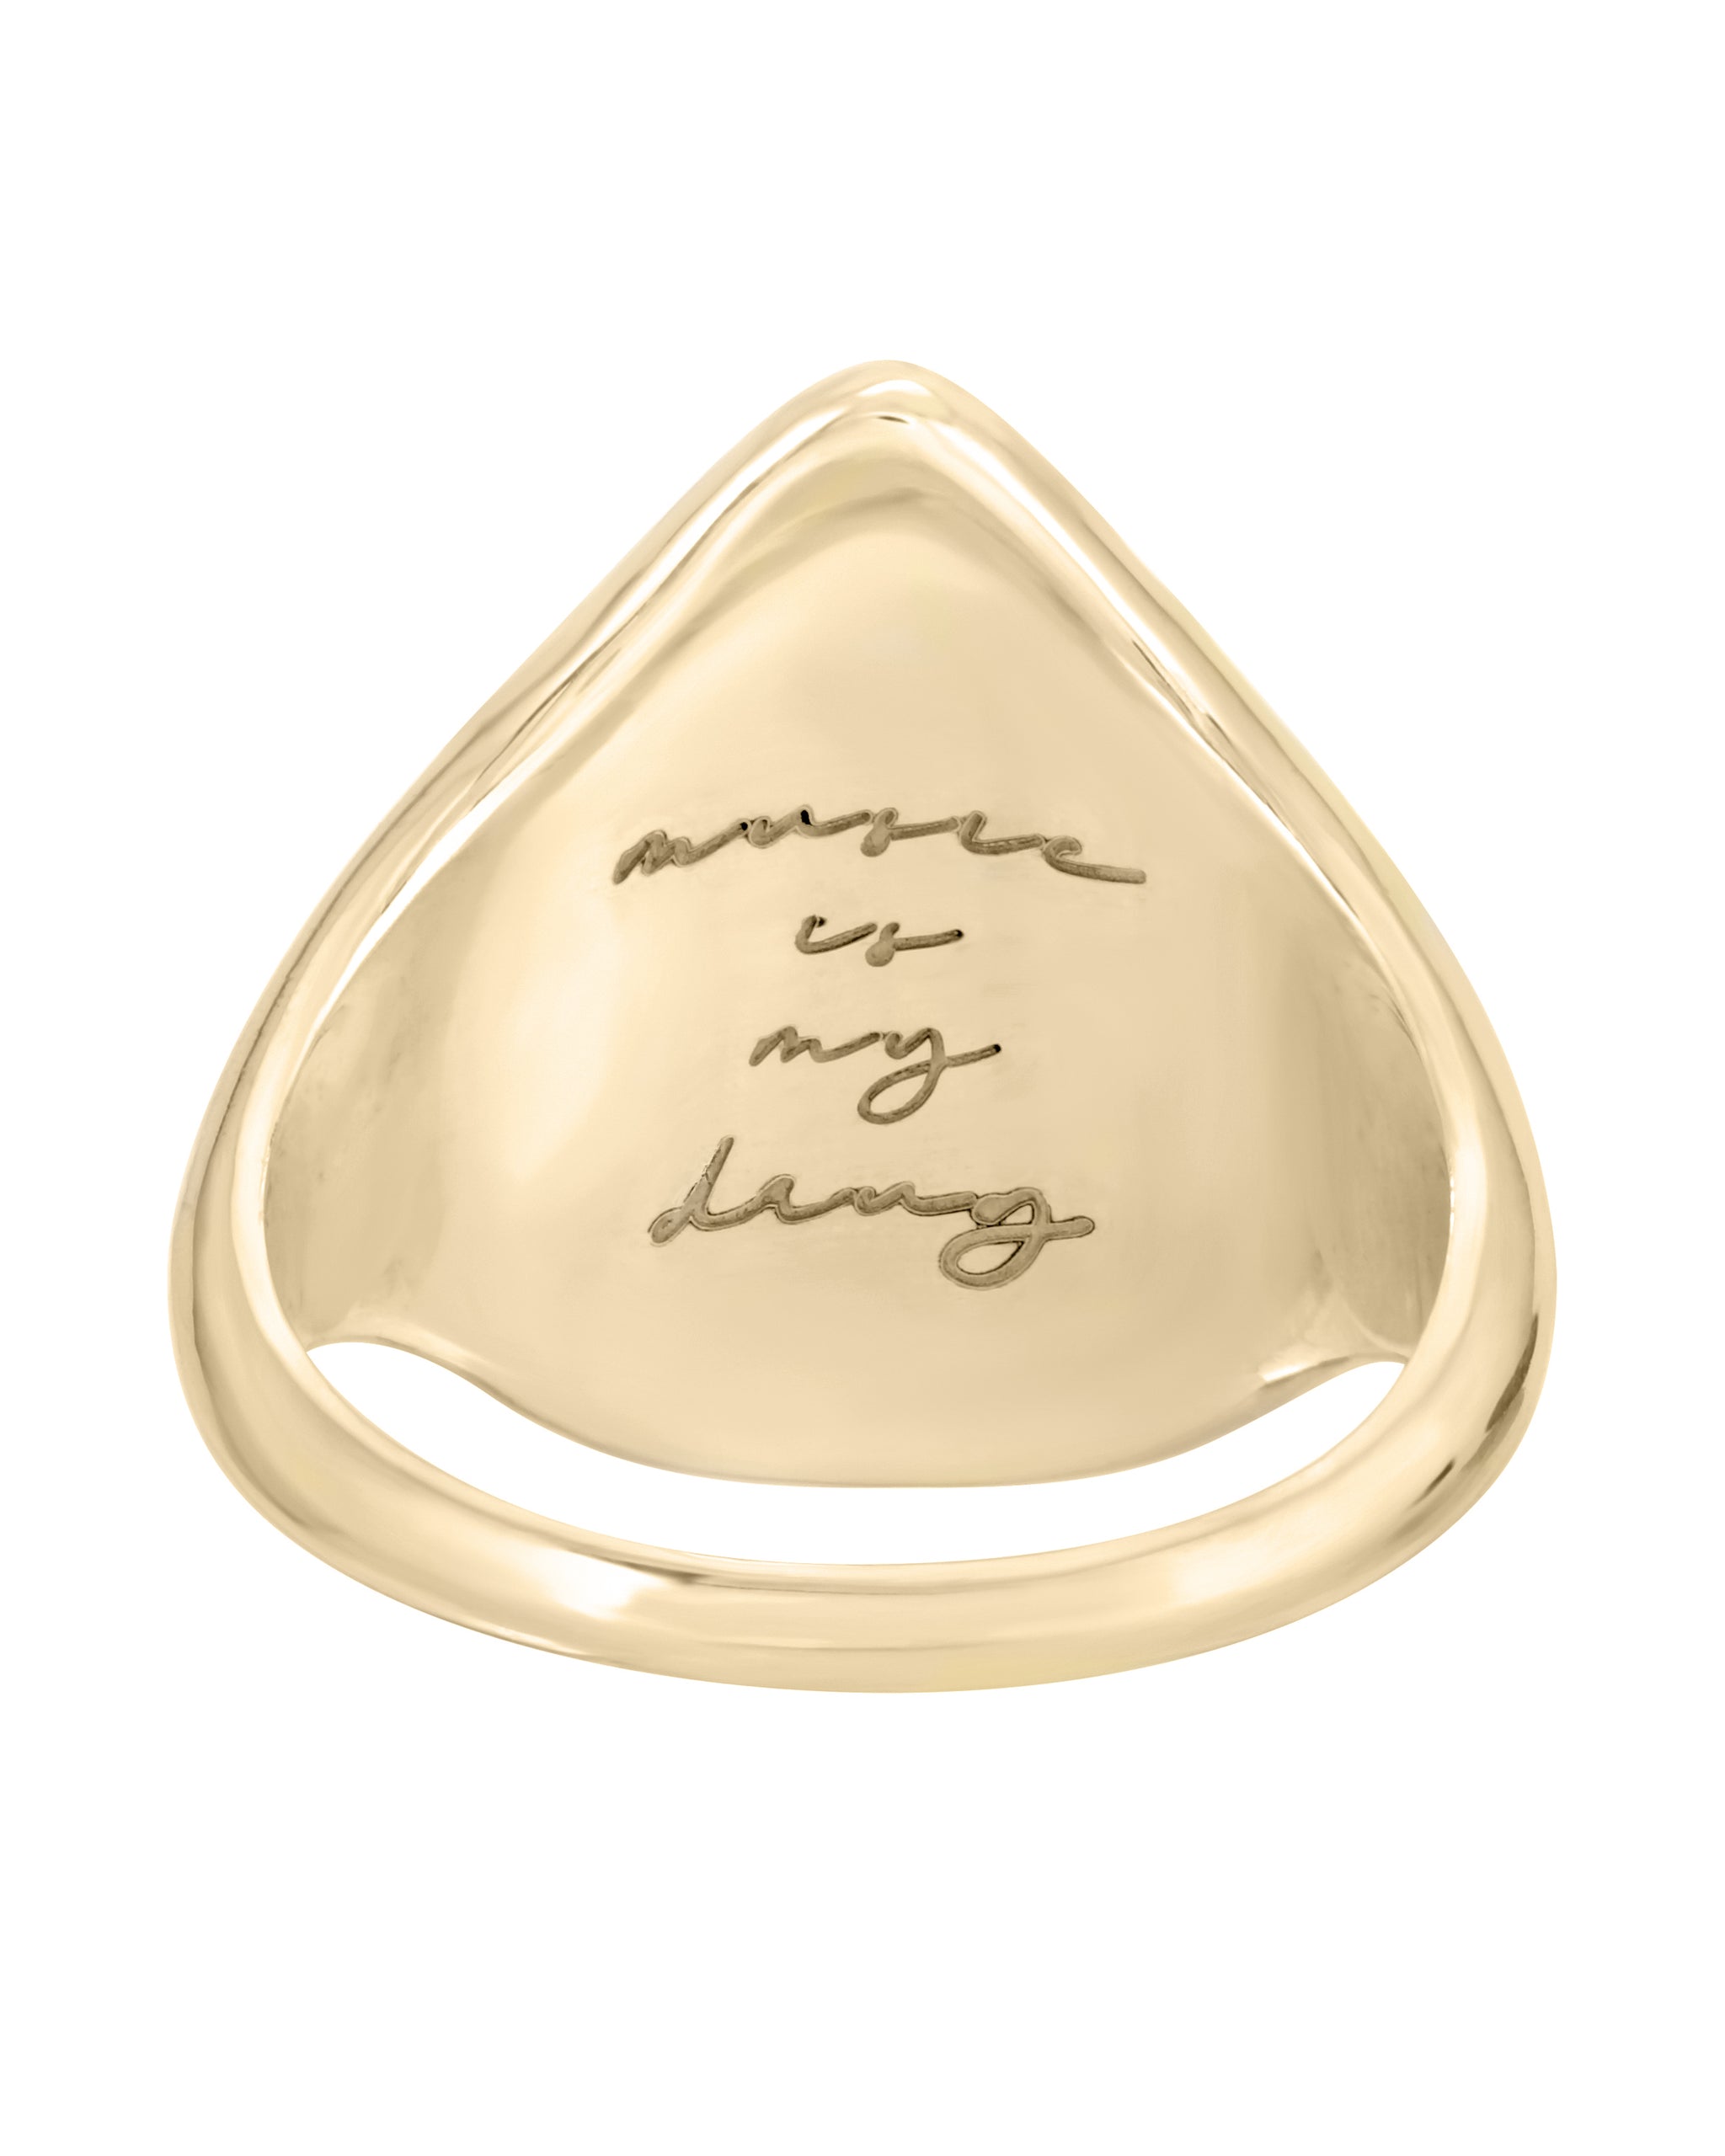 14k Yellow Gold Guitar Pic Ring with White diamond, "music is my drug" engraved on the inside, handmade in Los Angeles California by Turquoise + Tobacco